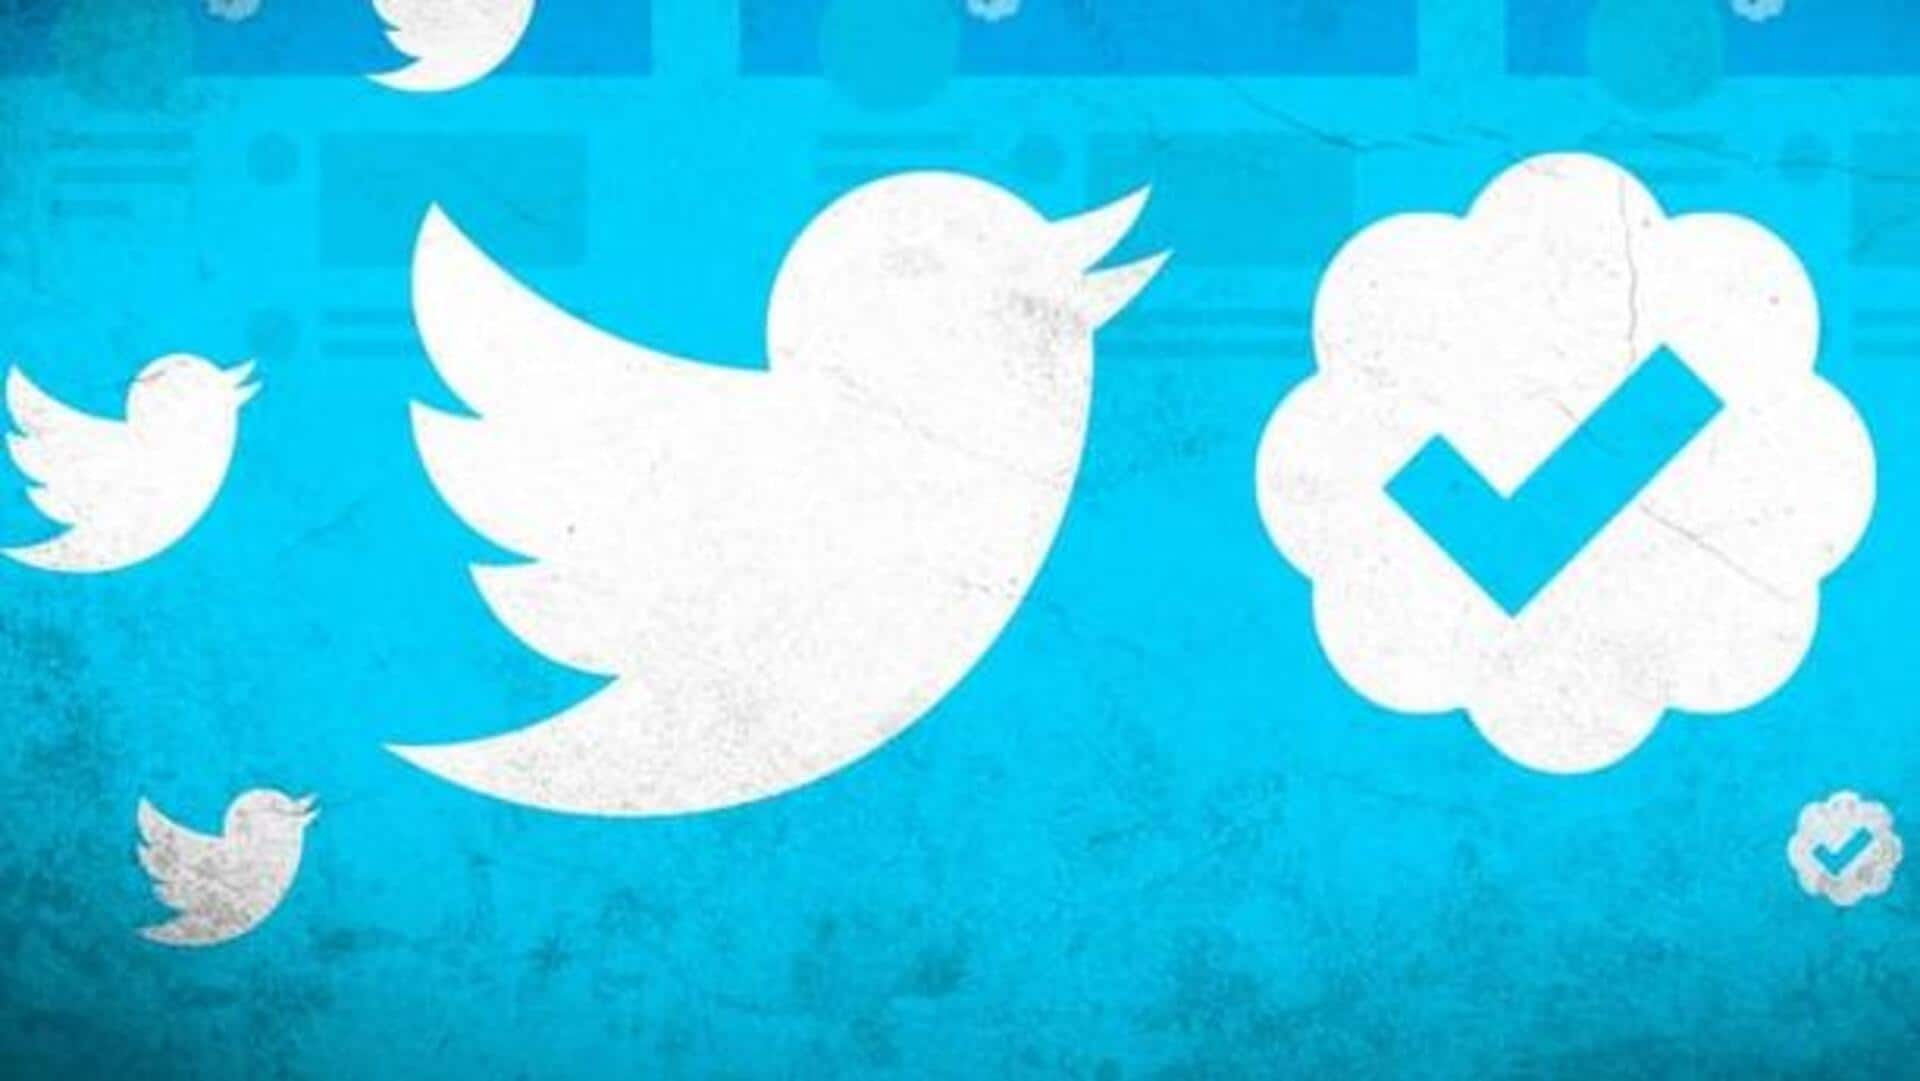 Twitter Blue subscribers can now post up to 25,000 characters